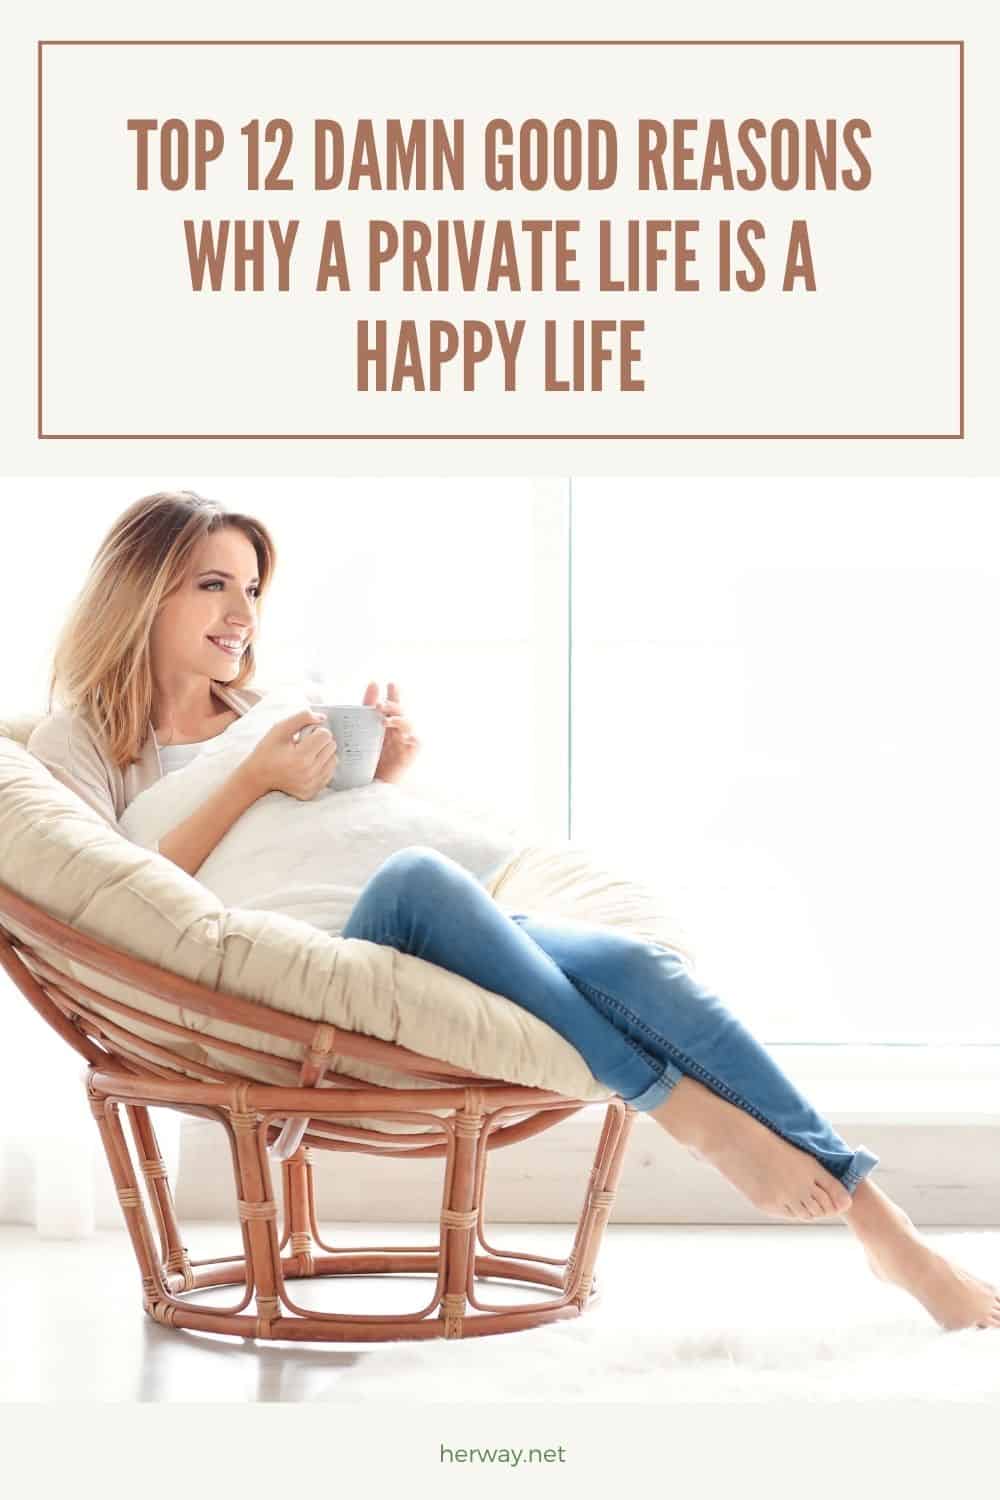 Top 12 Damn Good Reasons Why A Private Life Is A Happy Life